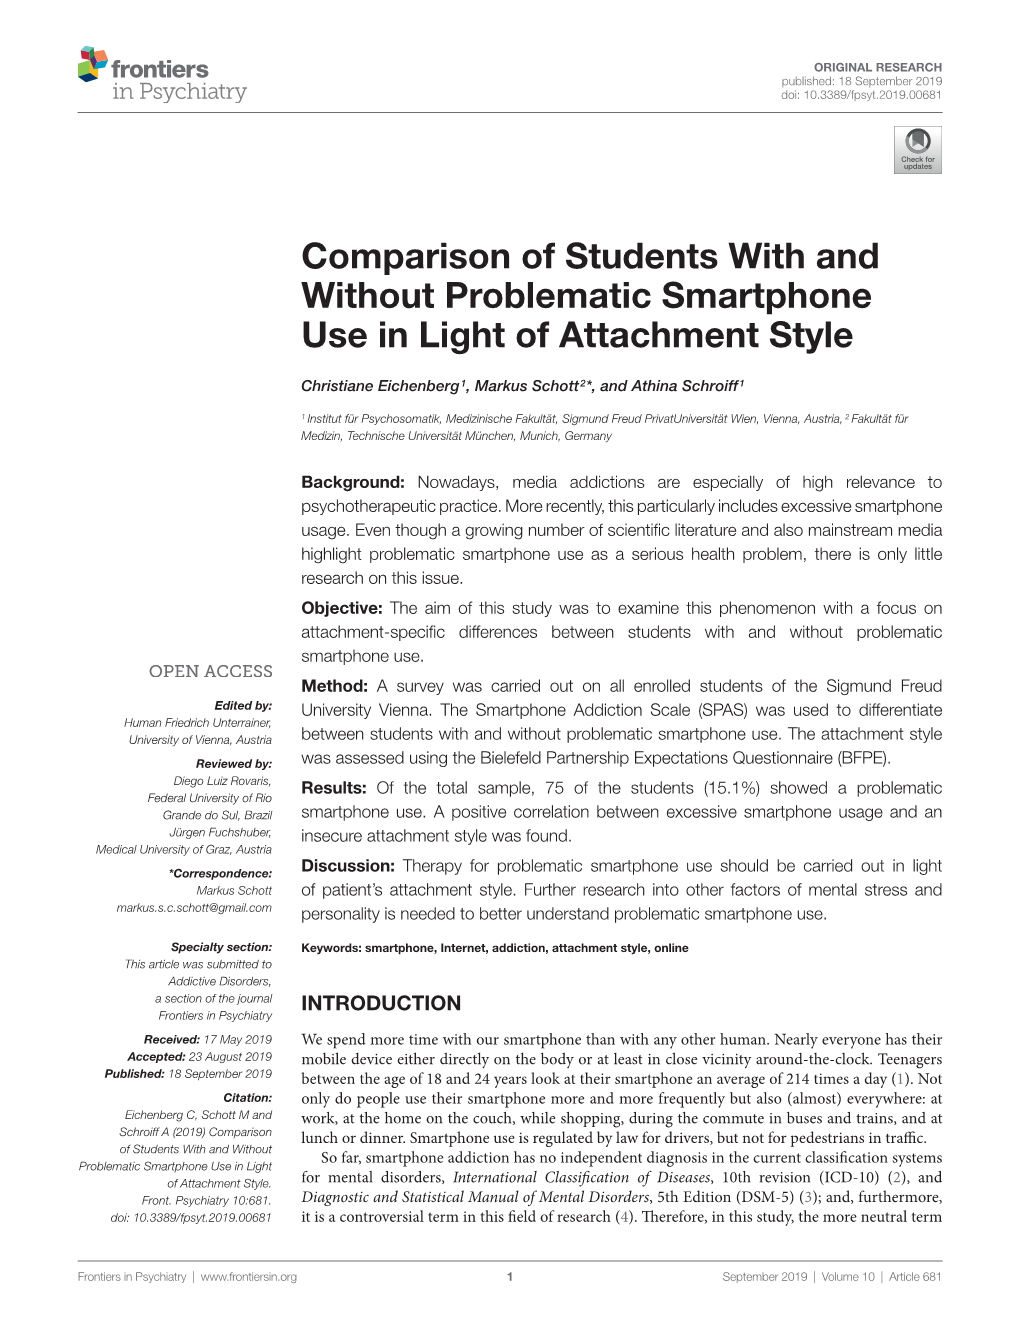 Comparison of Students with and Without Problematic Smartphone Use in Light of Attachment Style